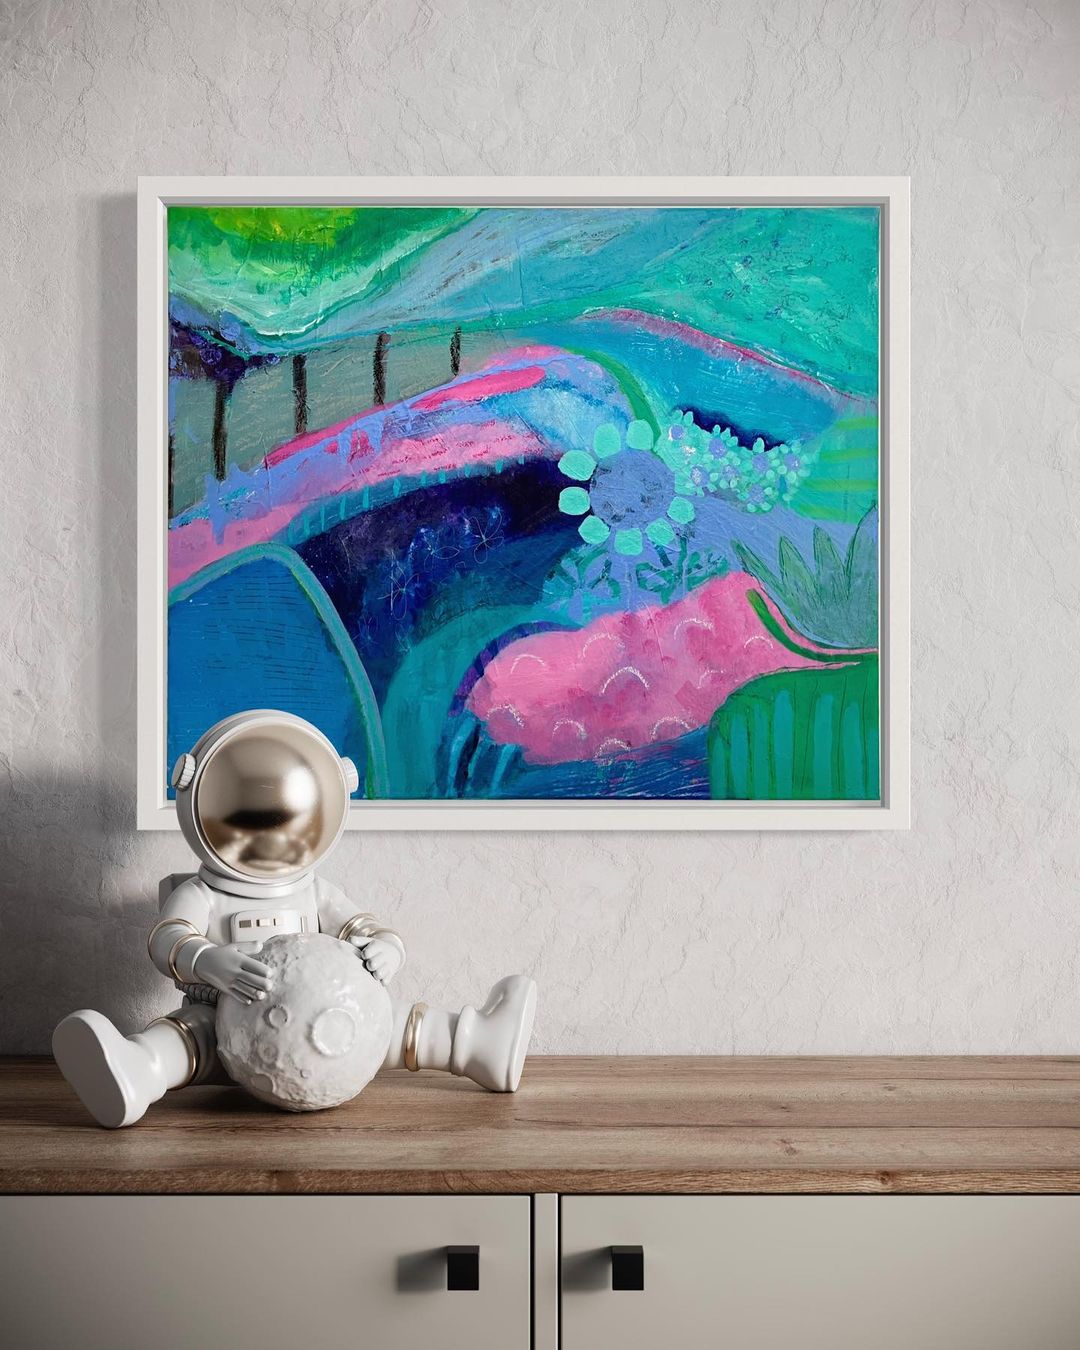 2. Framed natue inspired painting in shades of pink, blue, and green